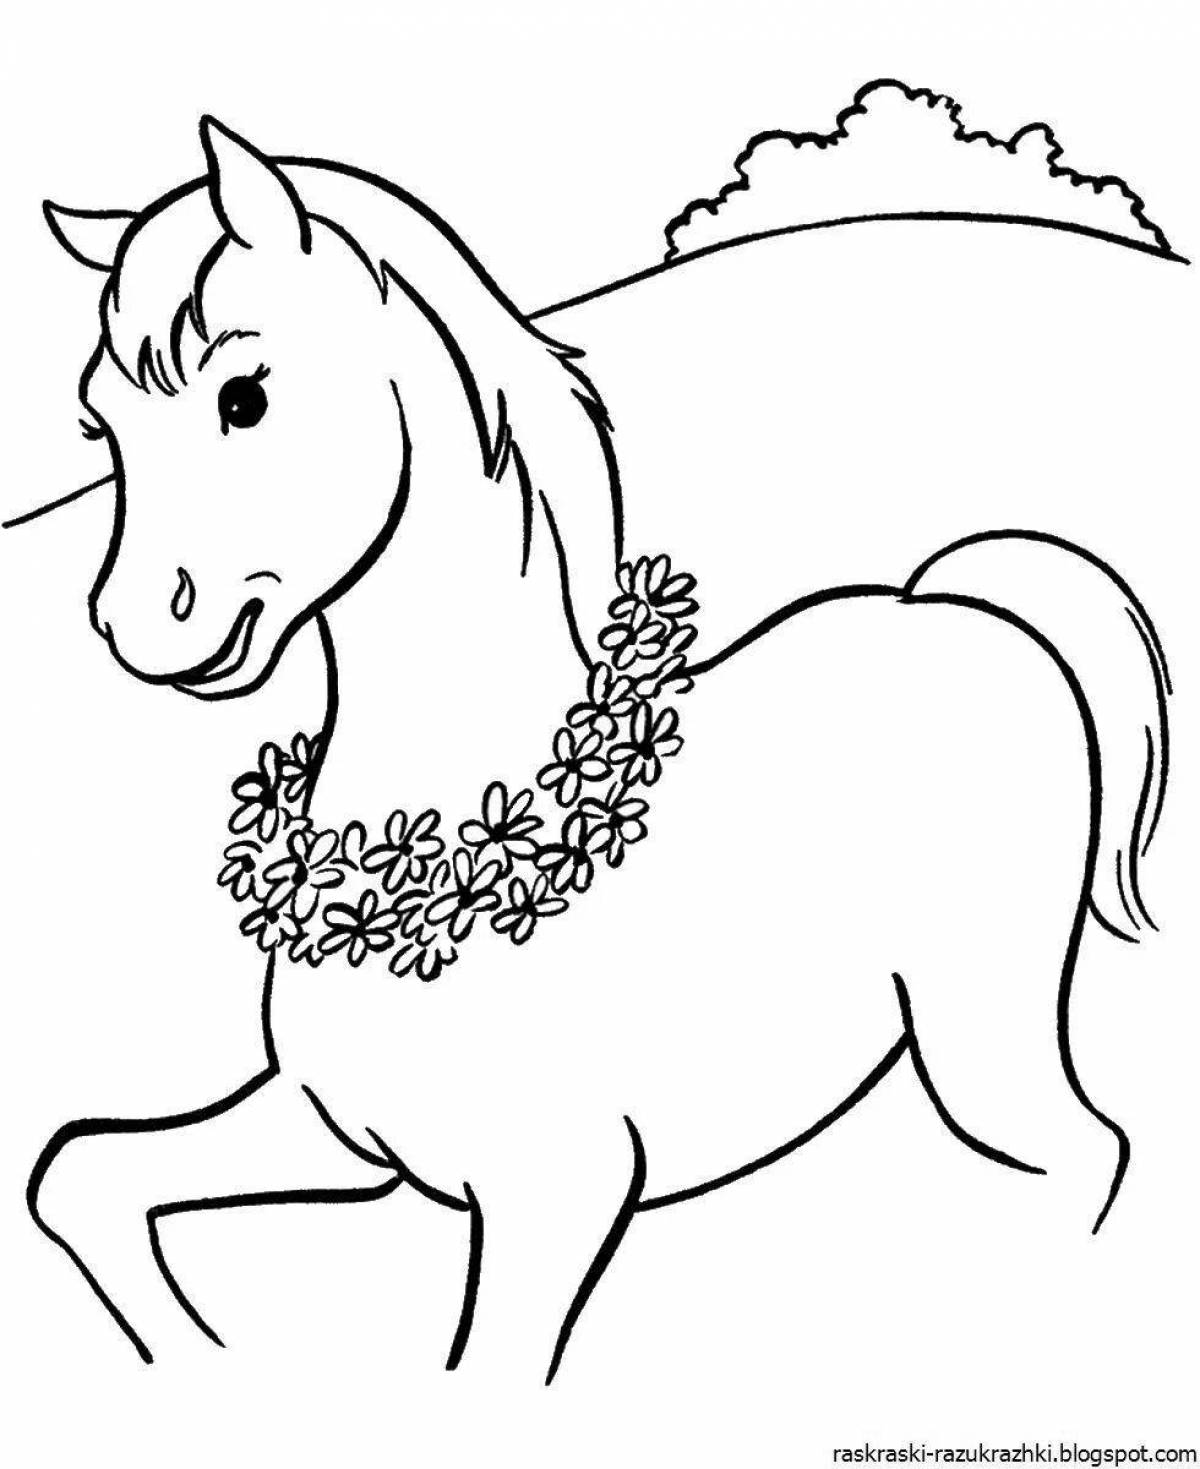 Cute horses coloring pages